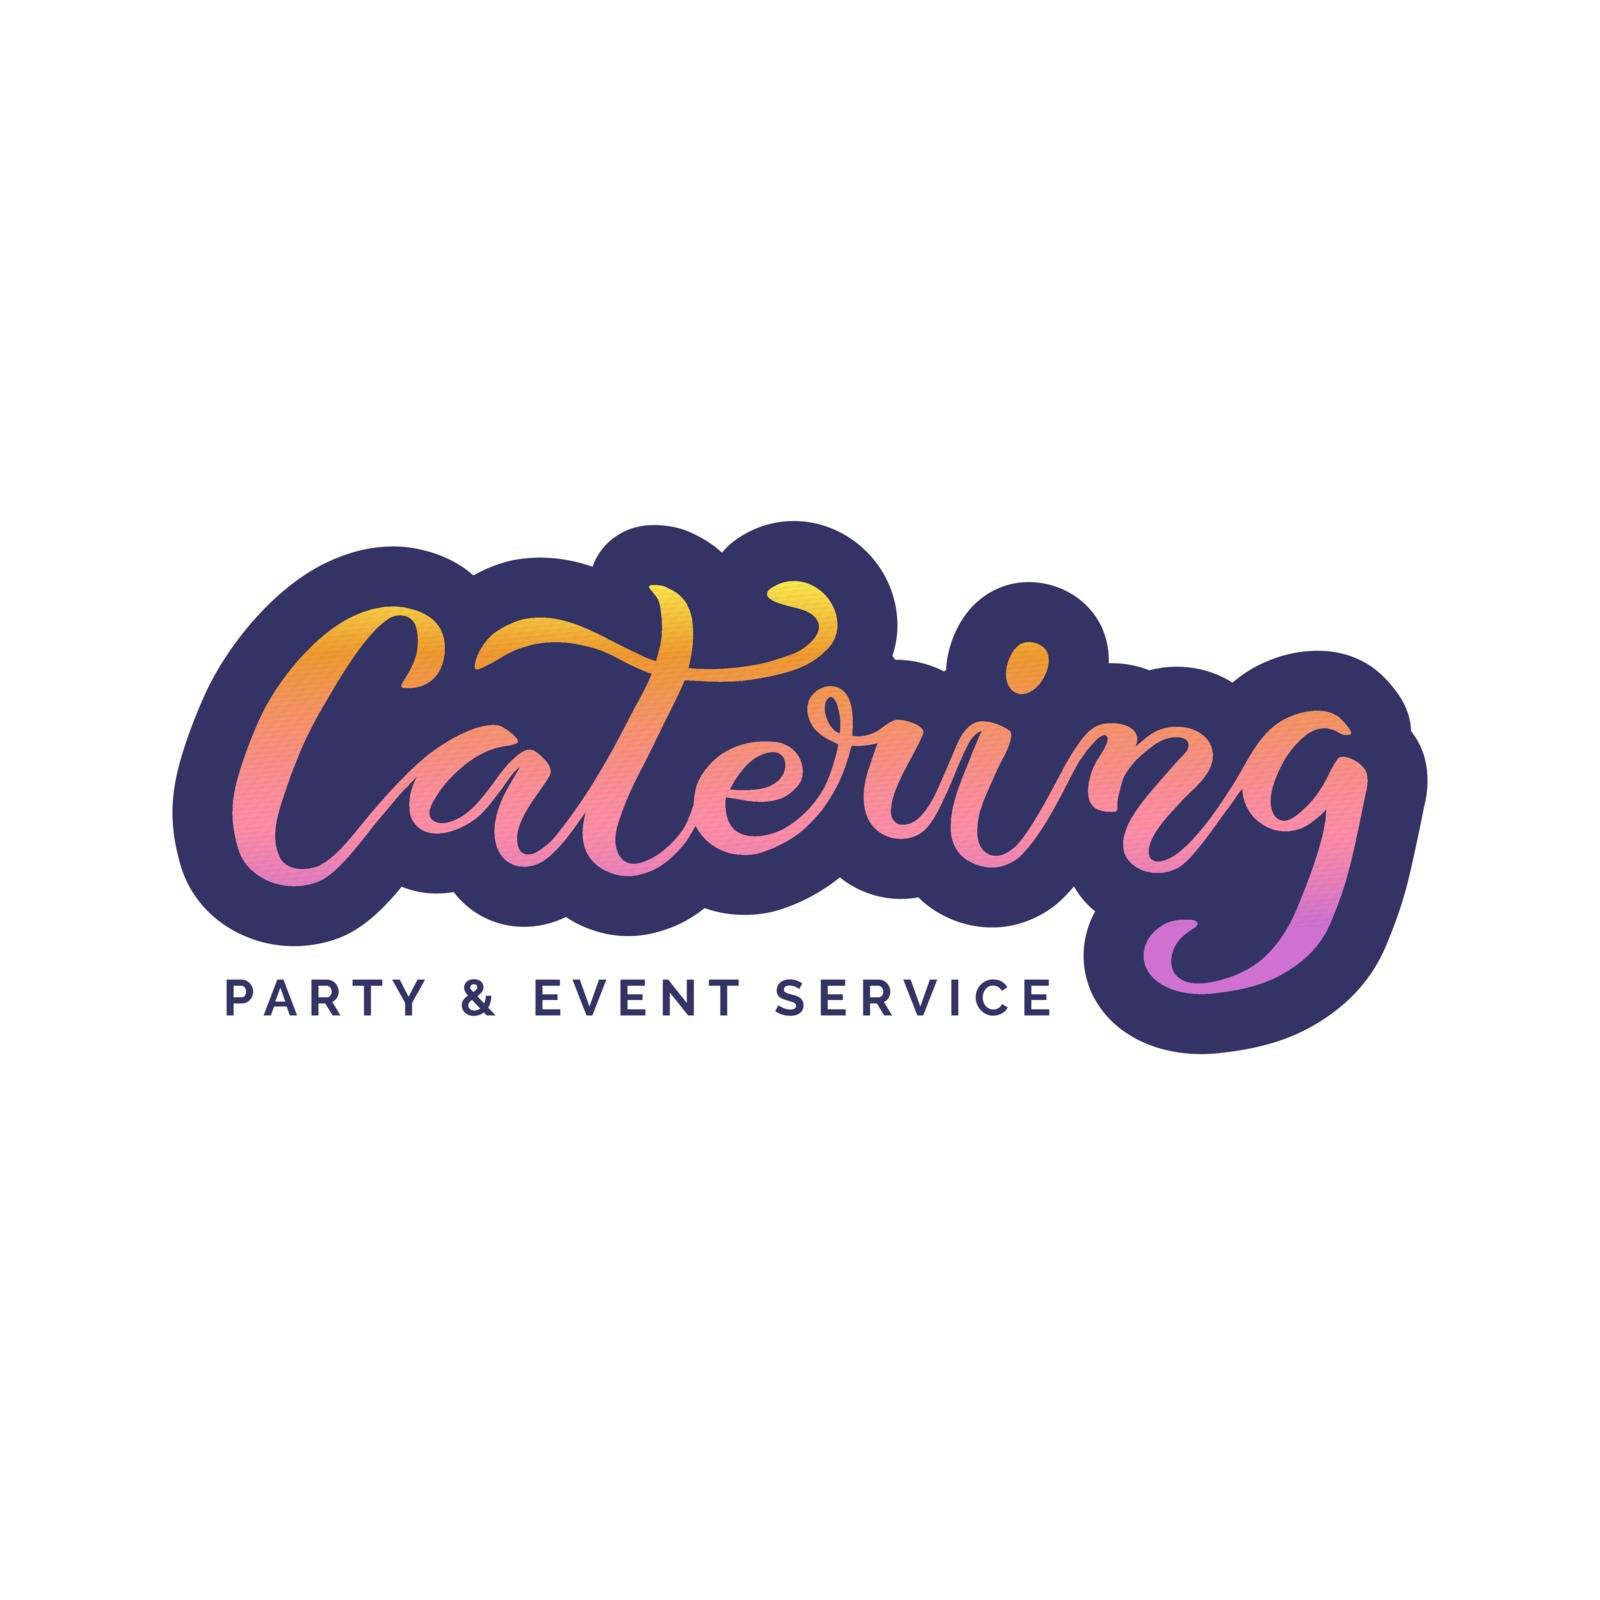 Template of catering company logo. Hand-drawn and digitized lettering. Restaurant service for events and party. Badge, icon, banner, tag. Vector illustration EPS 10.